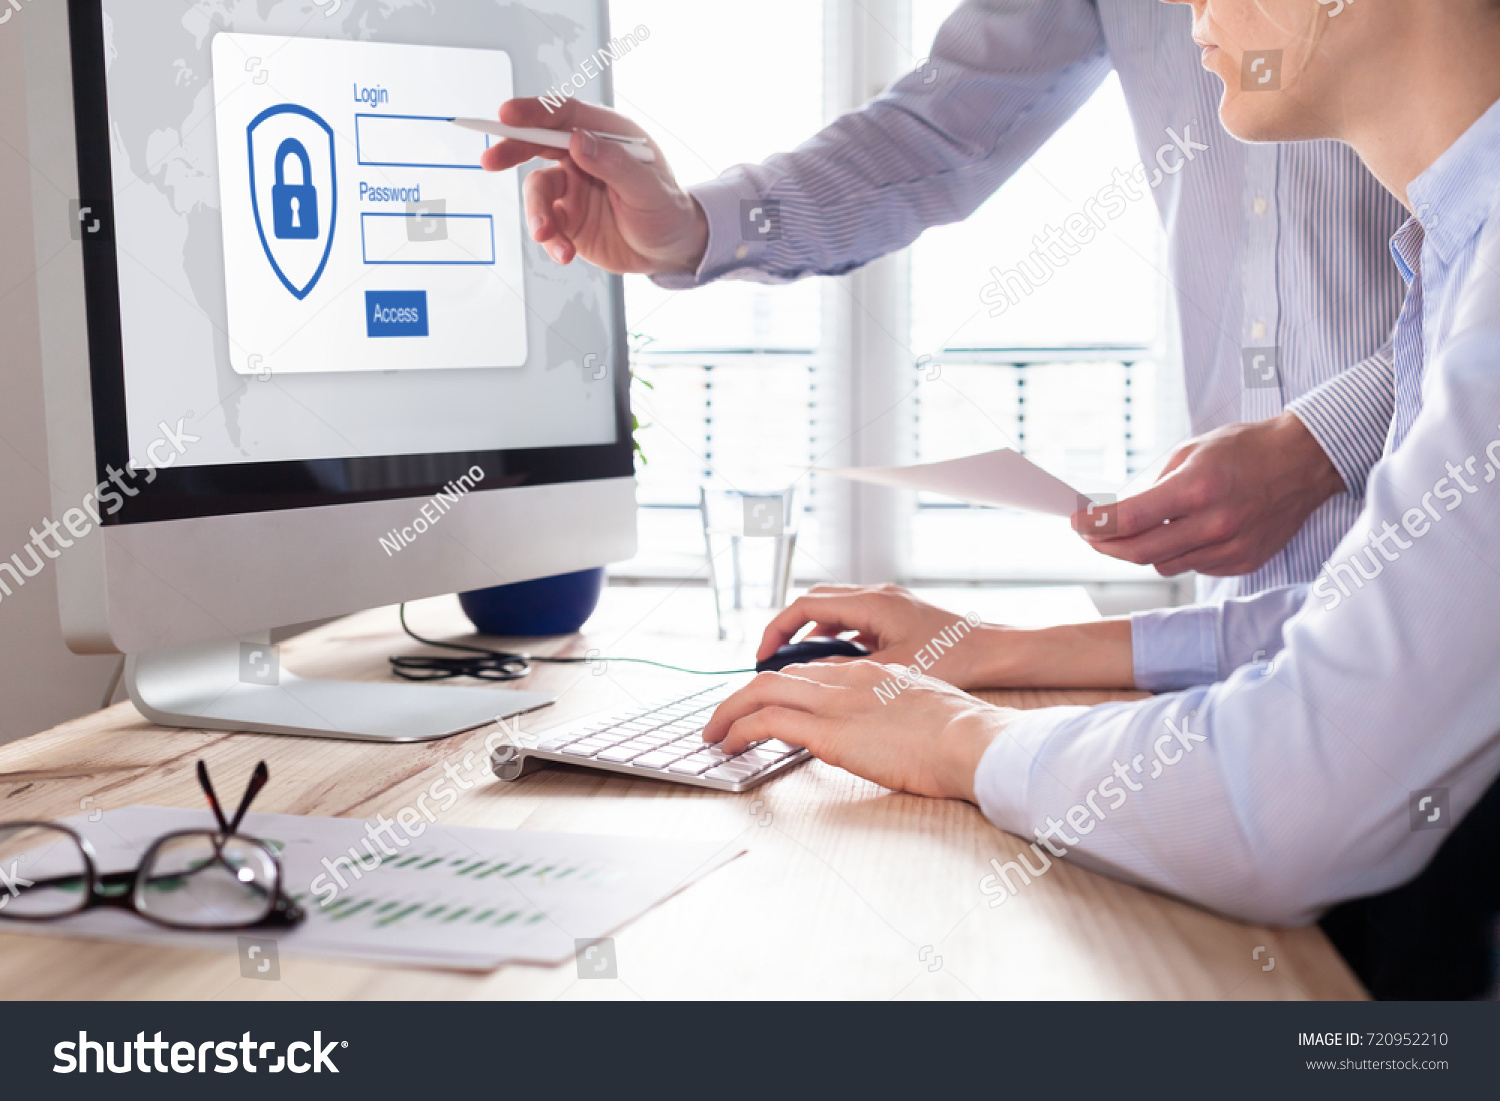 Cyber security concept with manager providing authentication credentials (login, password) to business person to access confidential data on computer screen #720952210